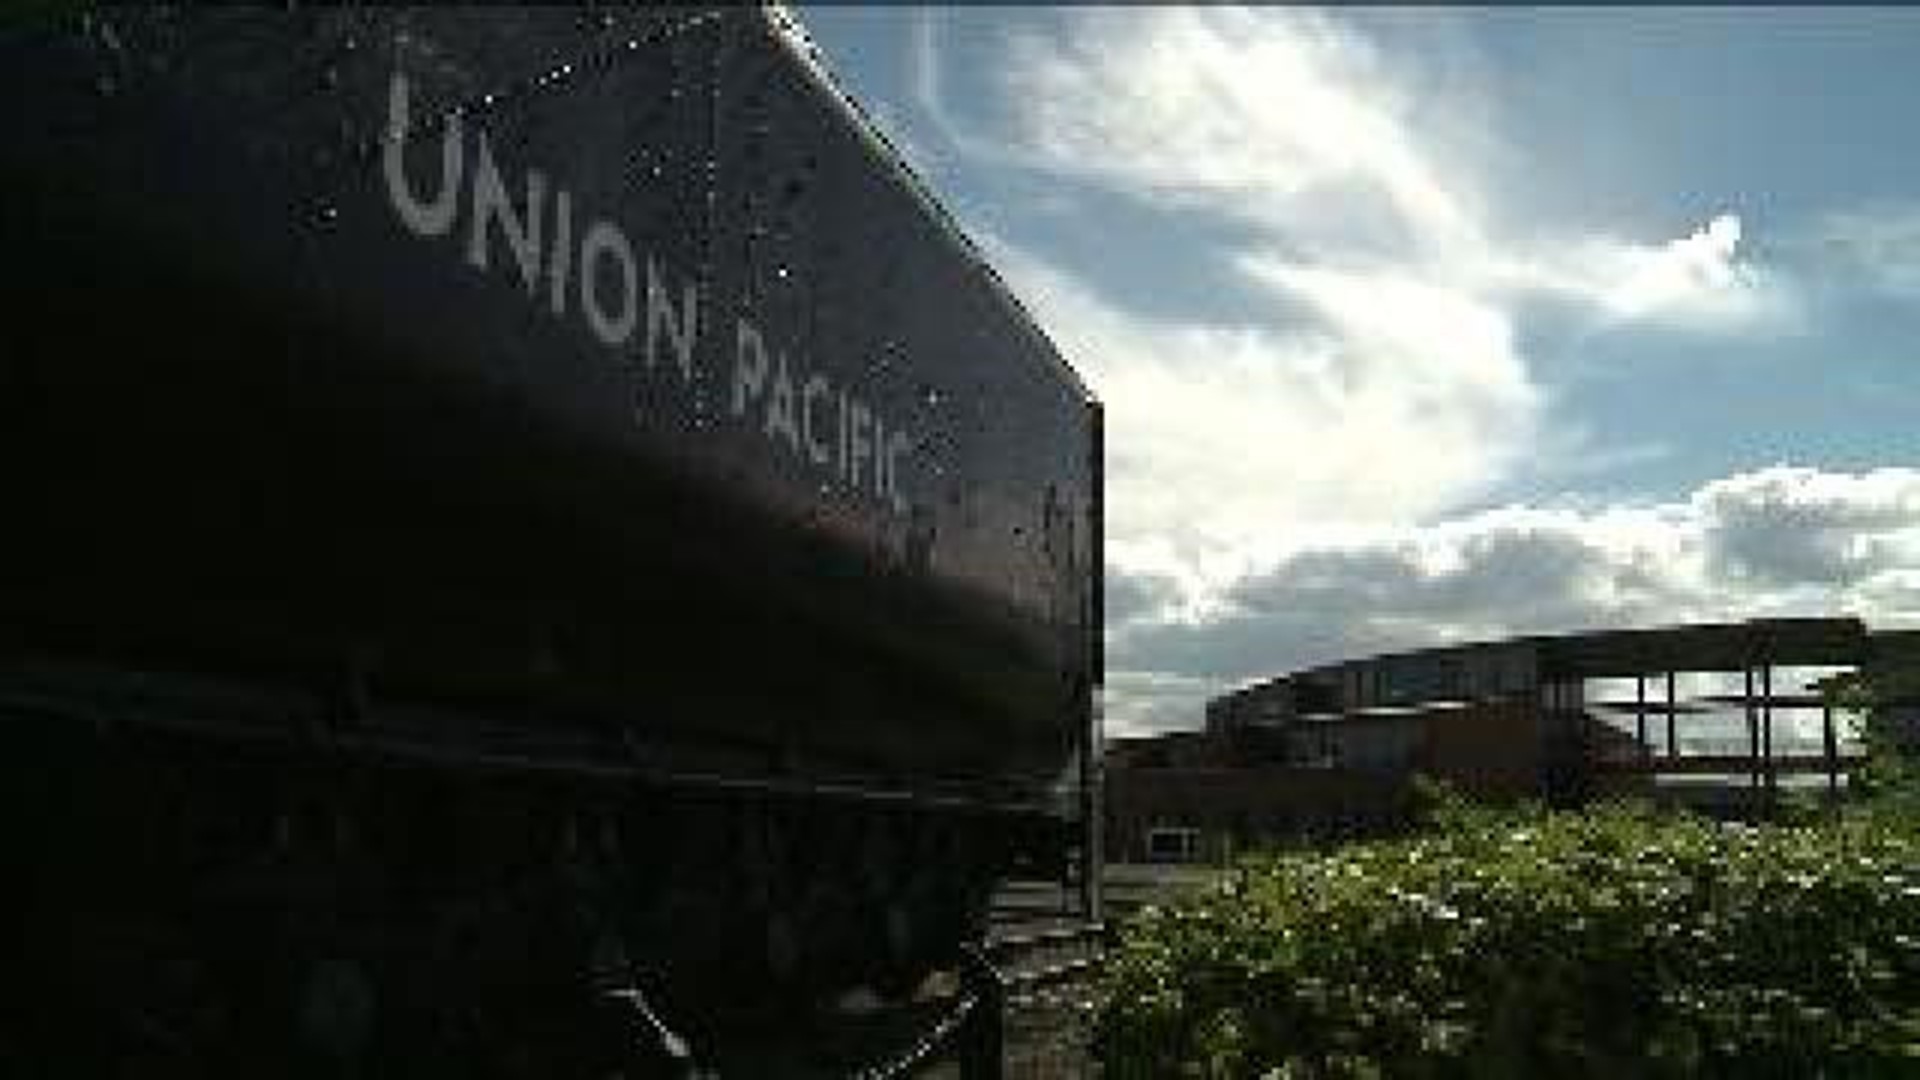 Shutdown Would Impact Steamtown Visitors, Employees